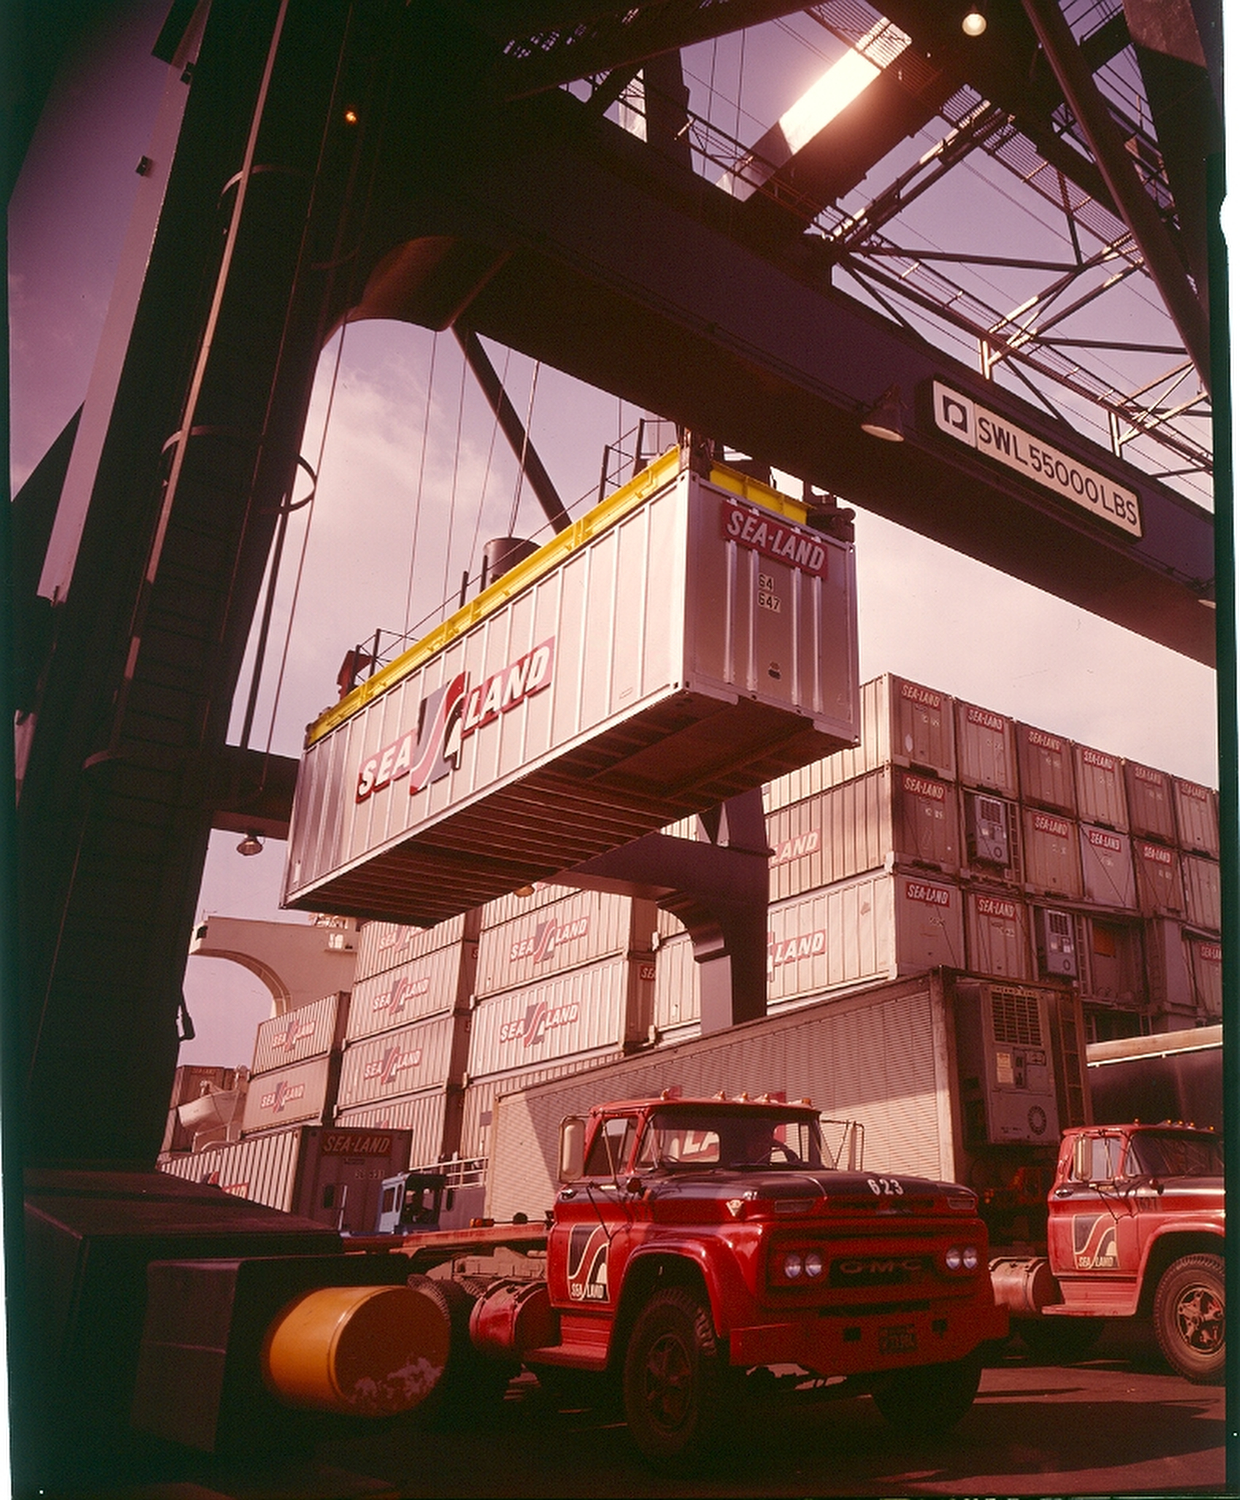 Containerization takes hold at the Port of Long Beach in the 1970s. Sea-Land terminal on Pier G, 1972.